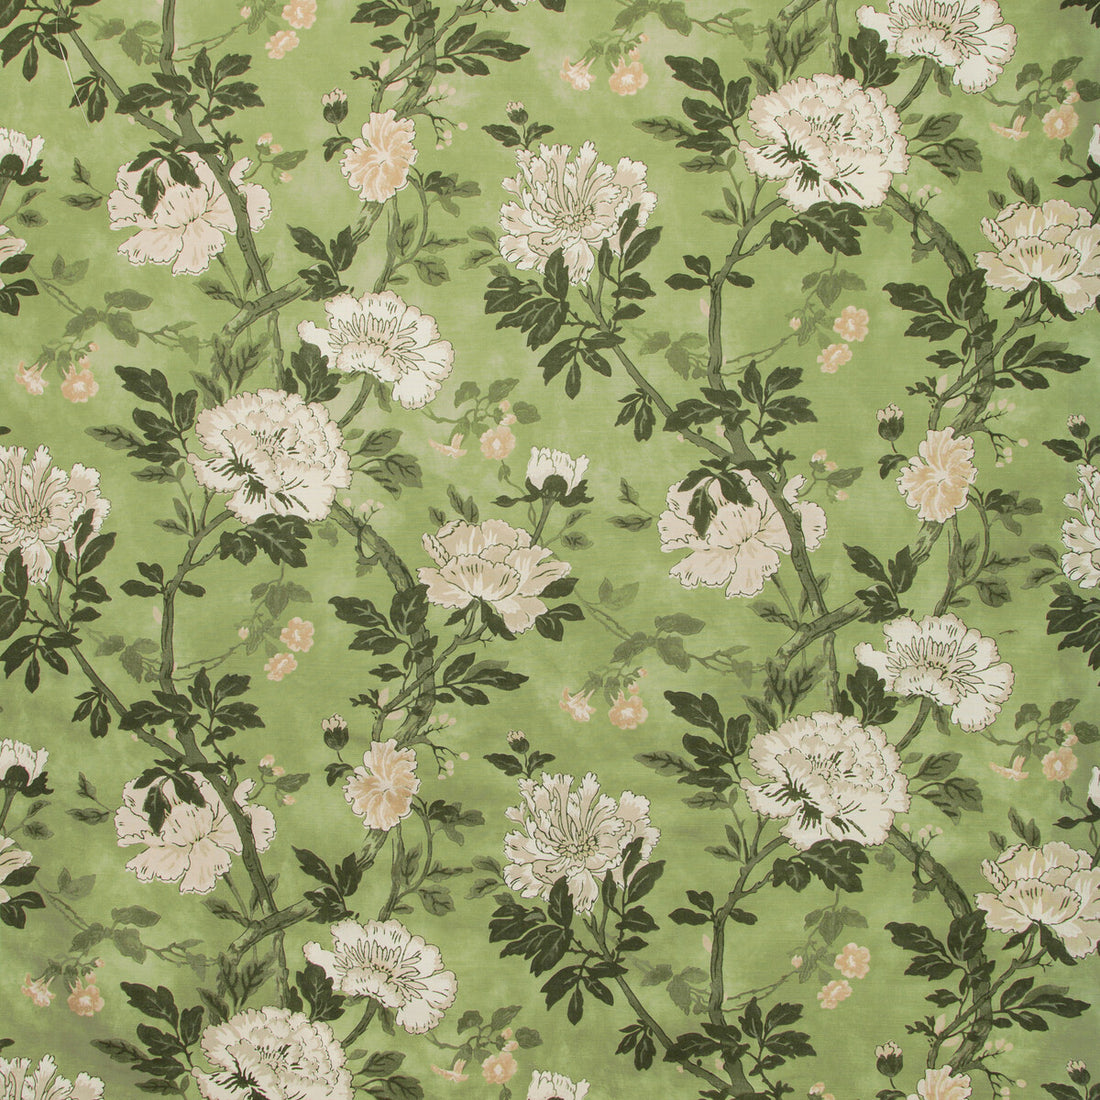 Inisfree fabric in meadow color - pattern 2019149.303.0 - by Lee Jofa in the Carrier And Company collection